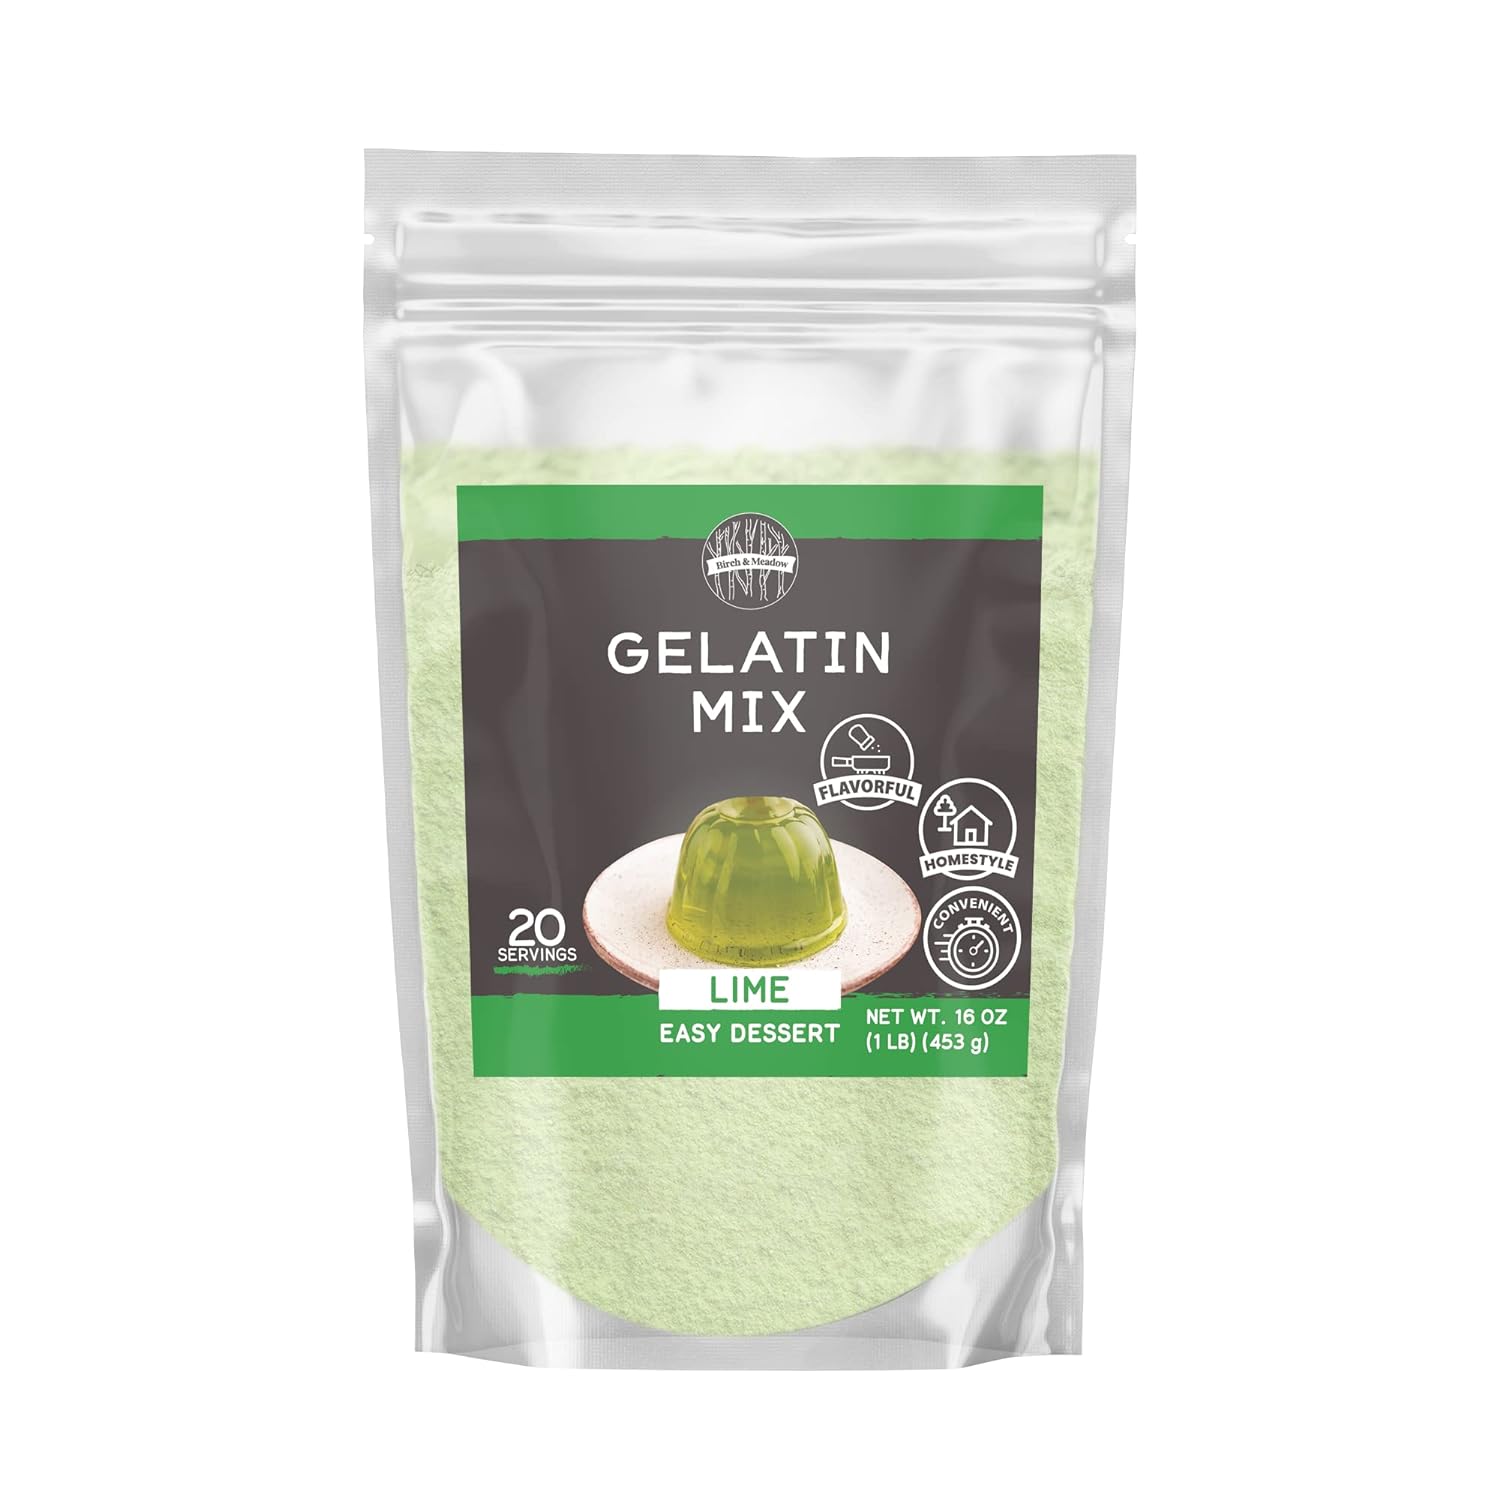 Birch & Meadow 1 lb of Lime Gelatin Mix, Dessert, Easy To Make